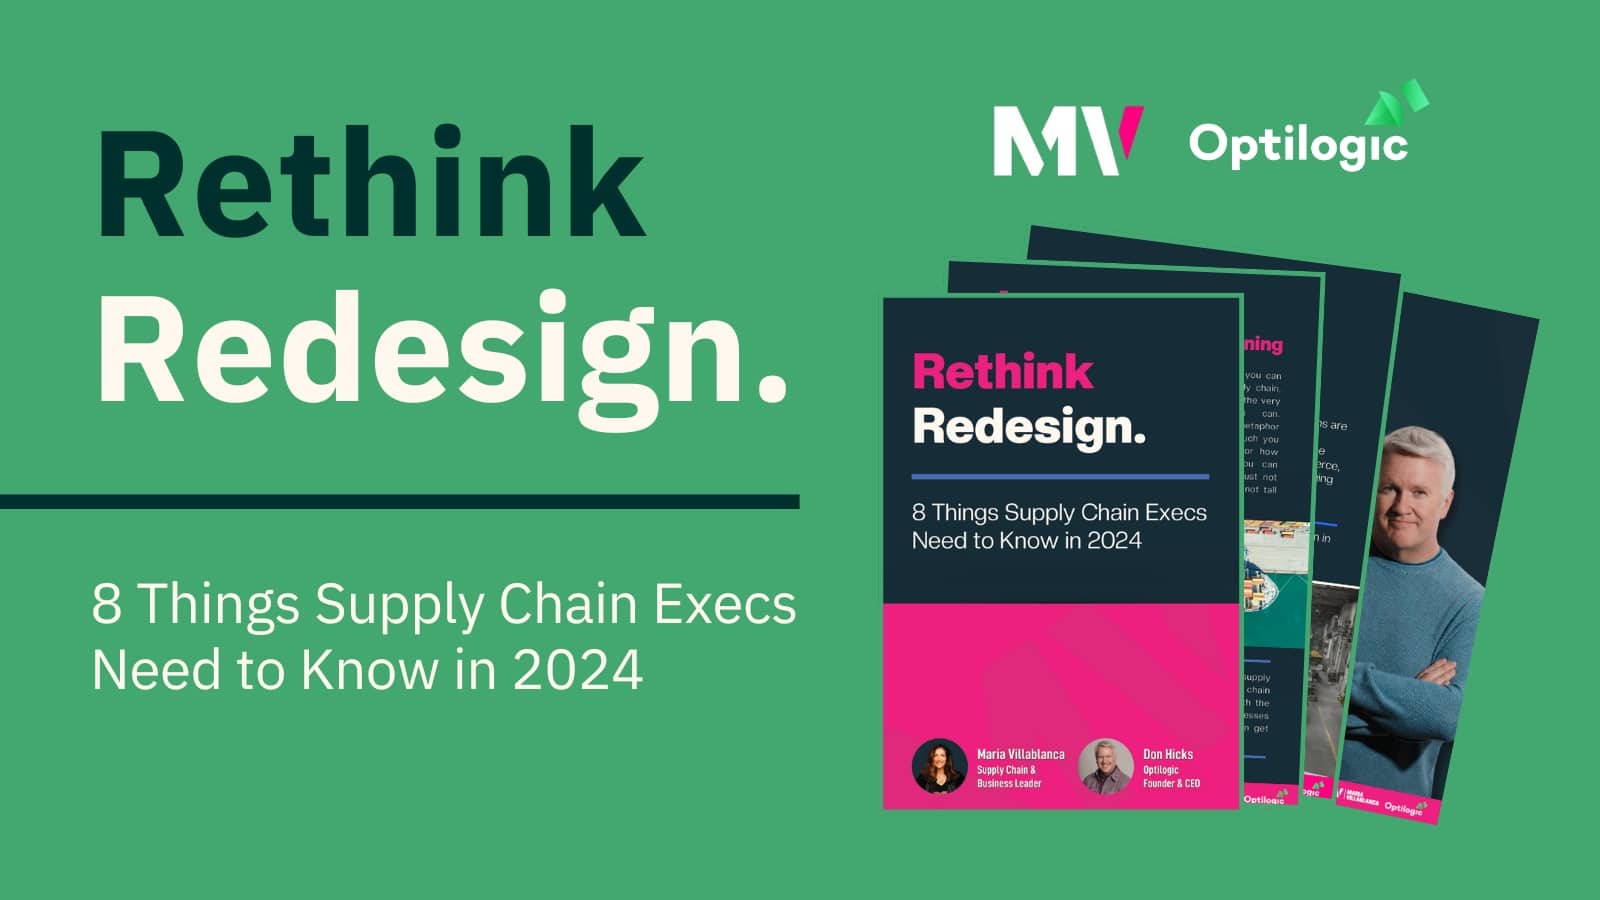 Rethink Redesign 8 Things Supply Chain Execs Need to Know in 2024